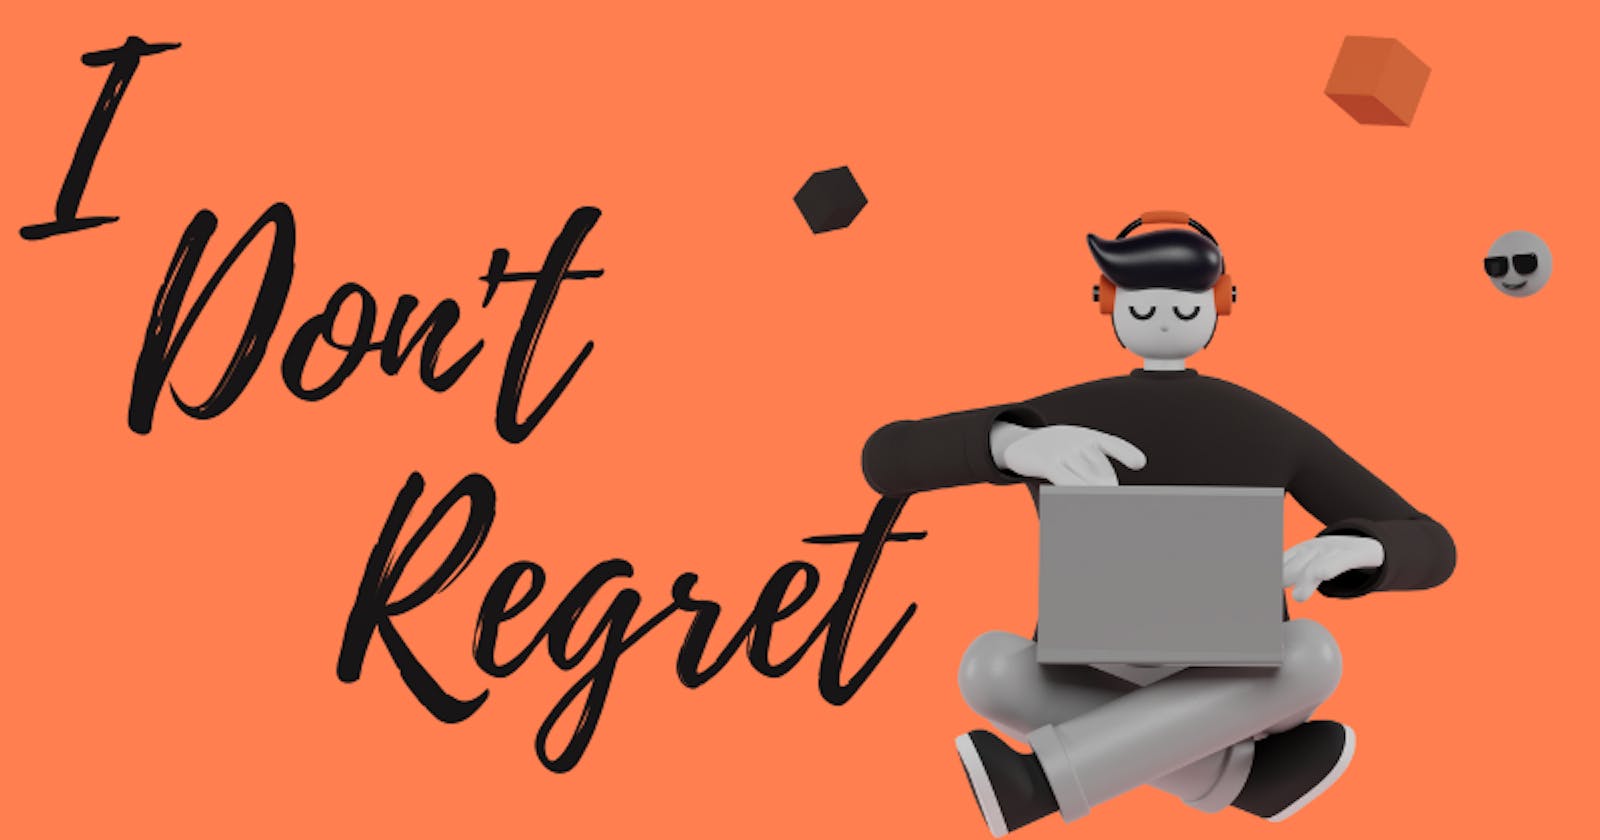 Why I don't regret being a developer